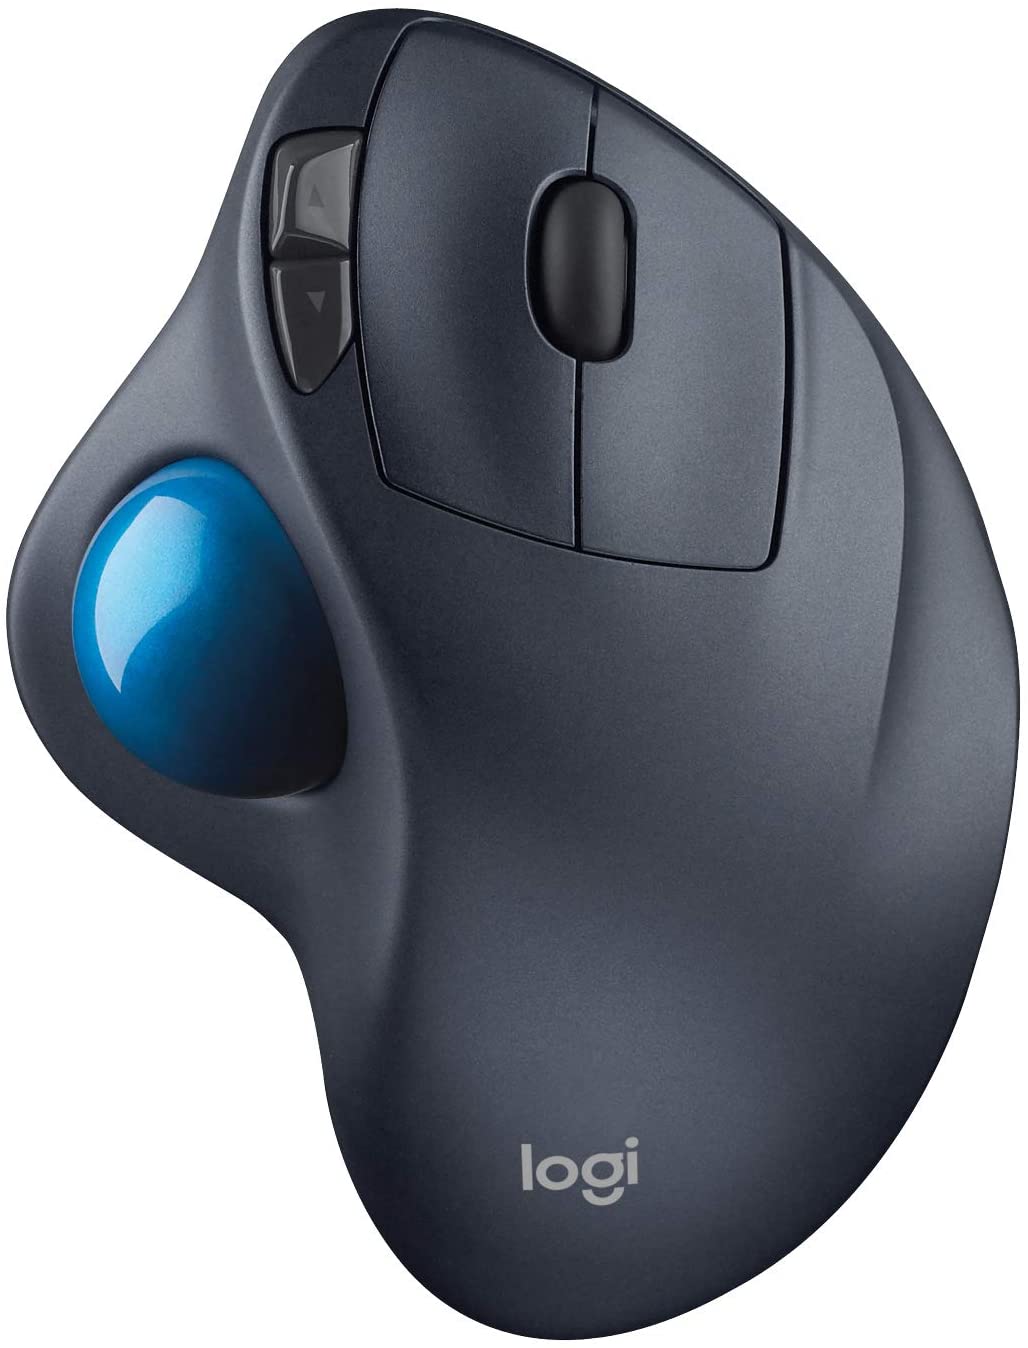 Logitech M570 Wireless Trackball Mouse (Discontinued by Manufacturer)